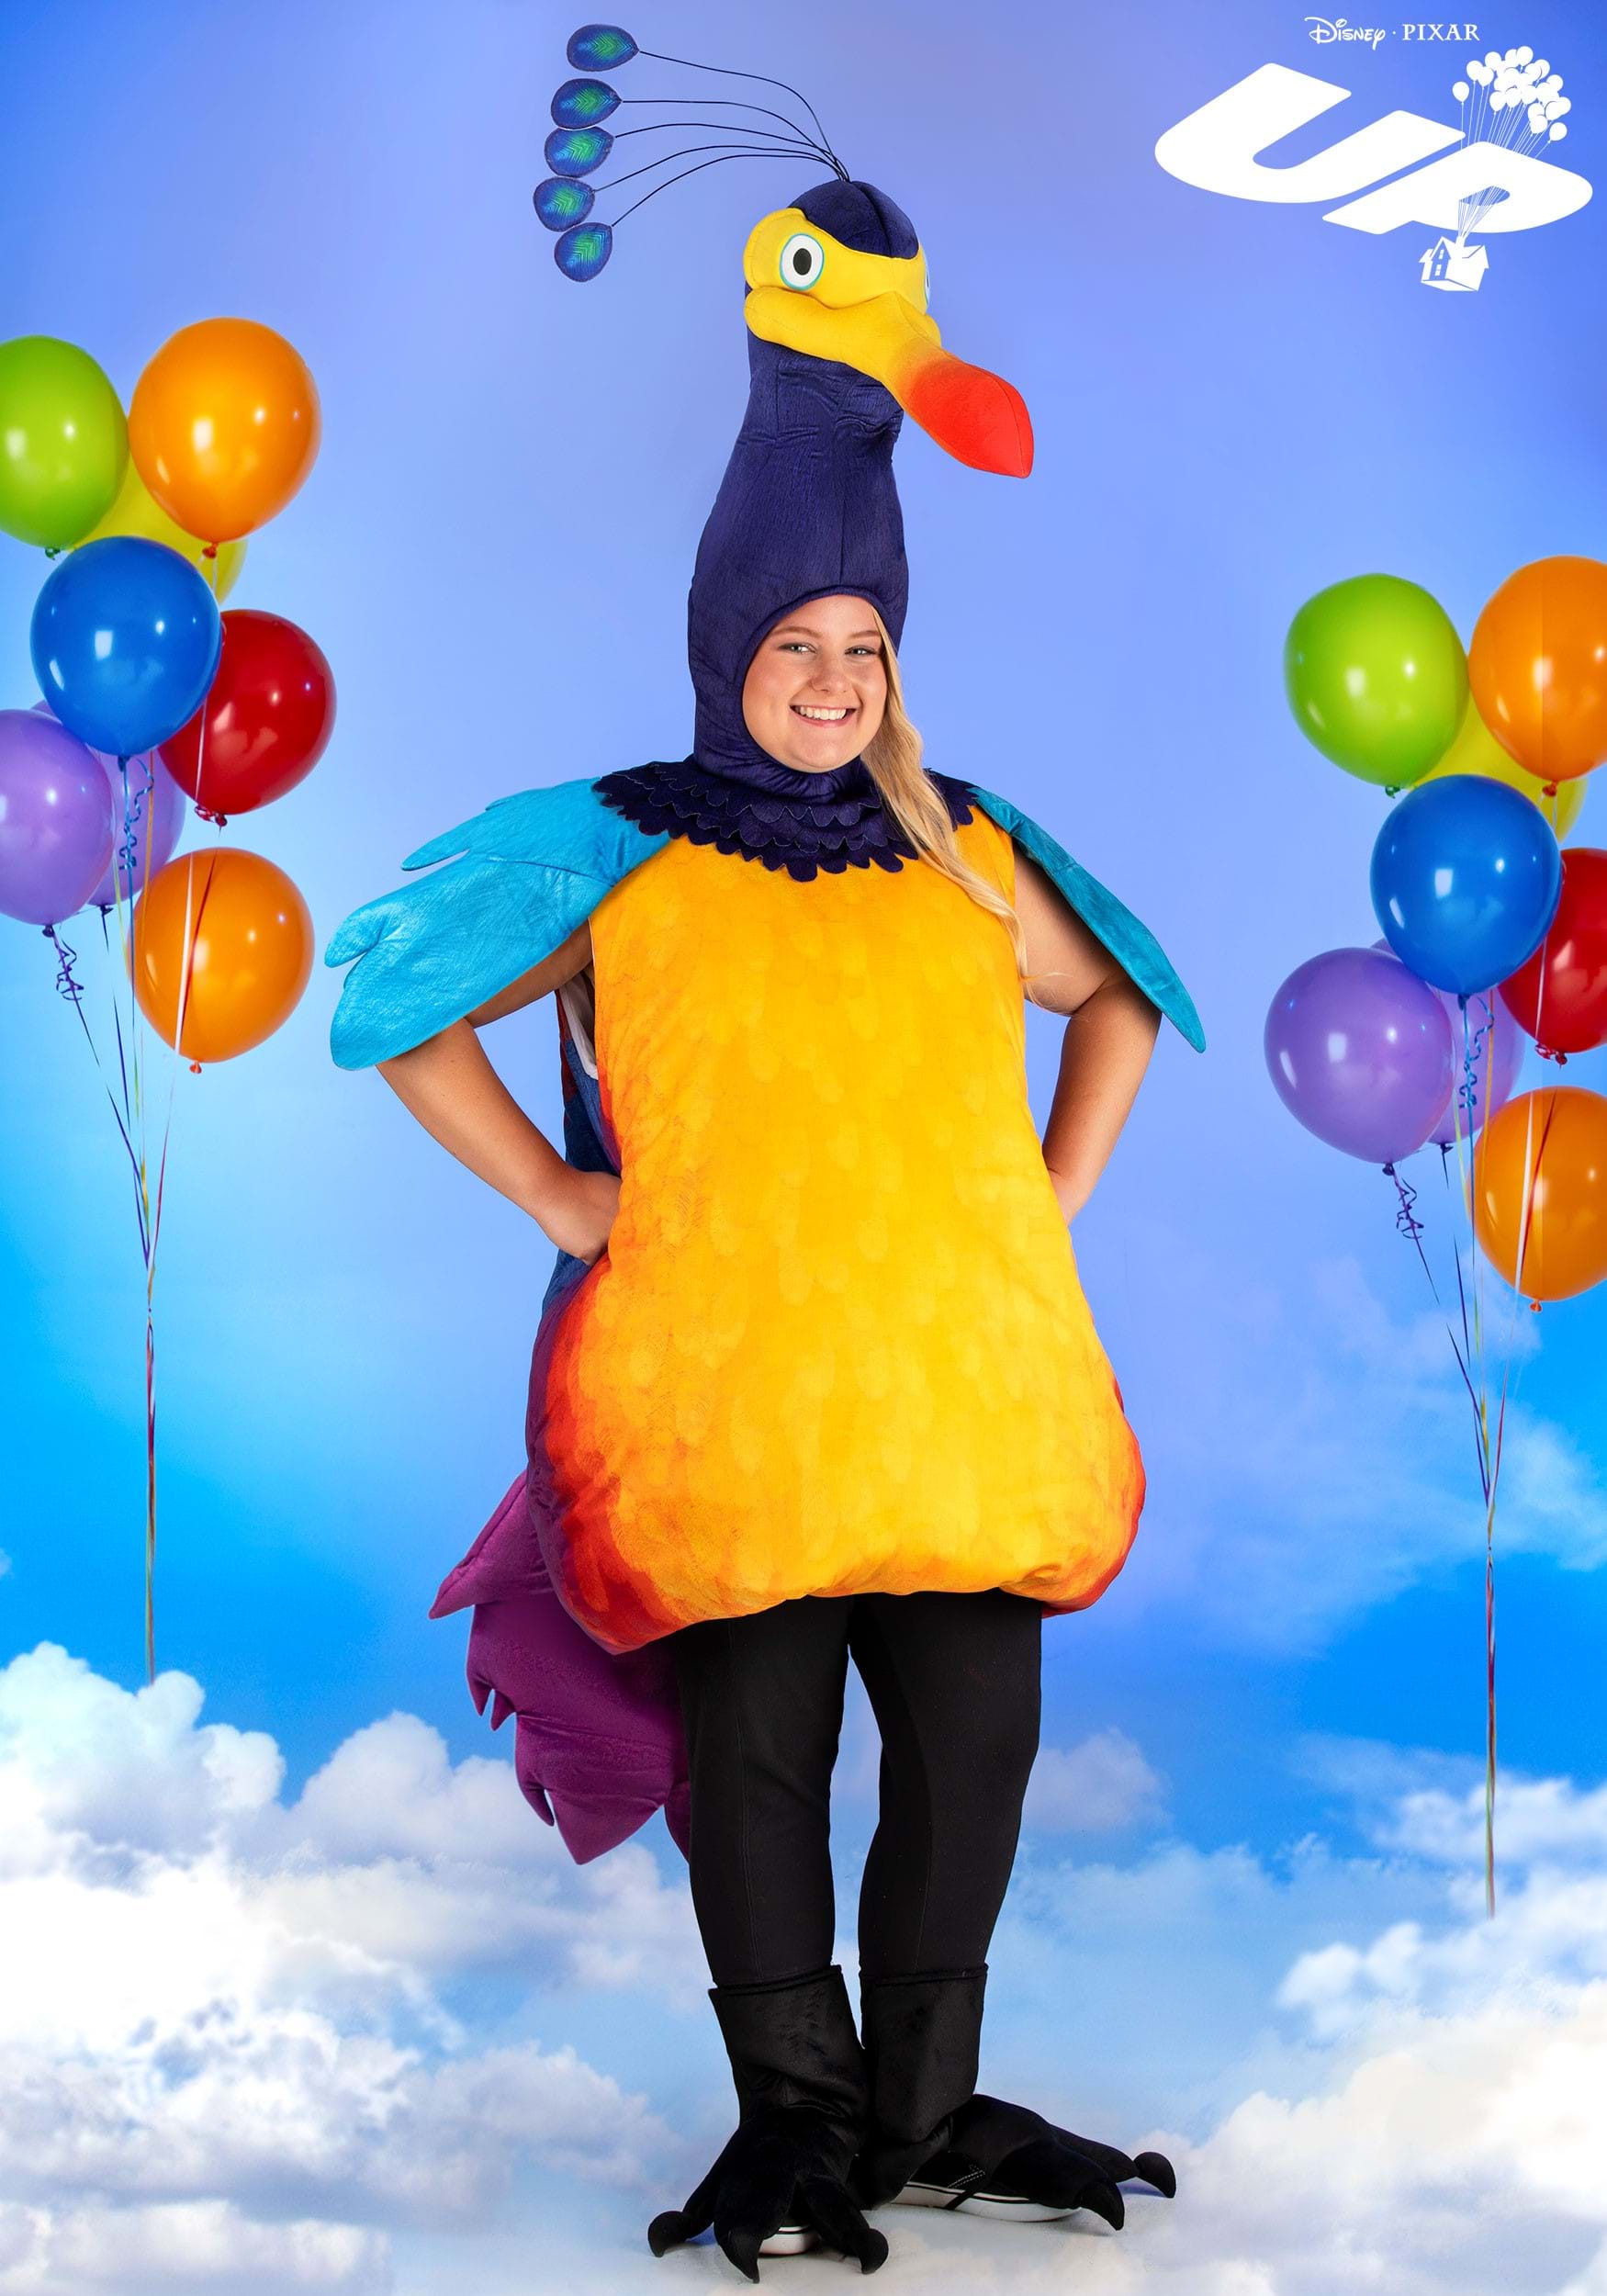 https://images.halloweencostumes.ca/products/74440/1-1/adult-plus-size-disney-up-kevin-costume-upd-main.jpg